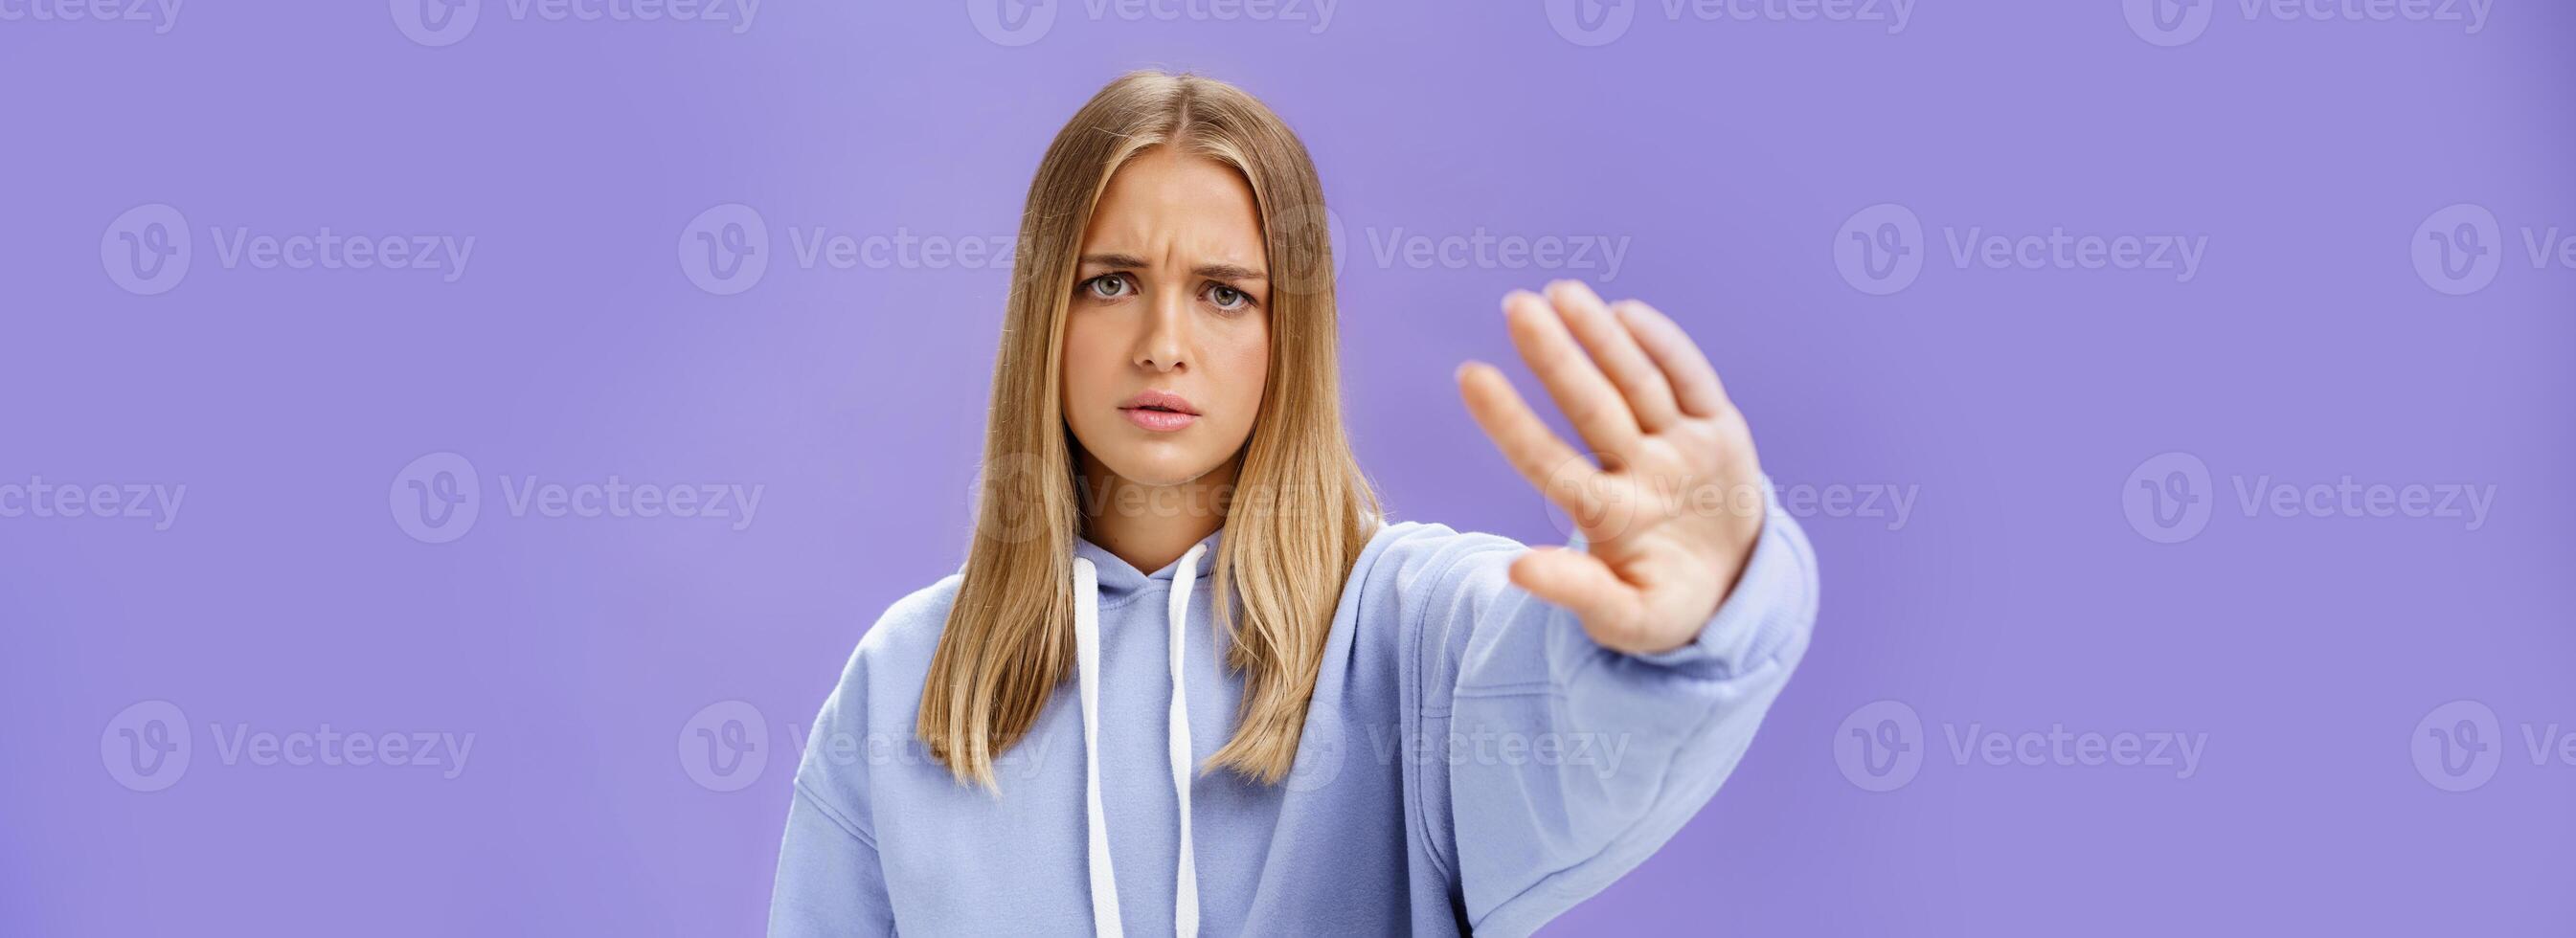 Stop photographing me. Concerned displeased young woman demanding end shooting pulling hand towards camera in no and rejection gesture frowning looking serious and displeased over blue wall photo